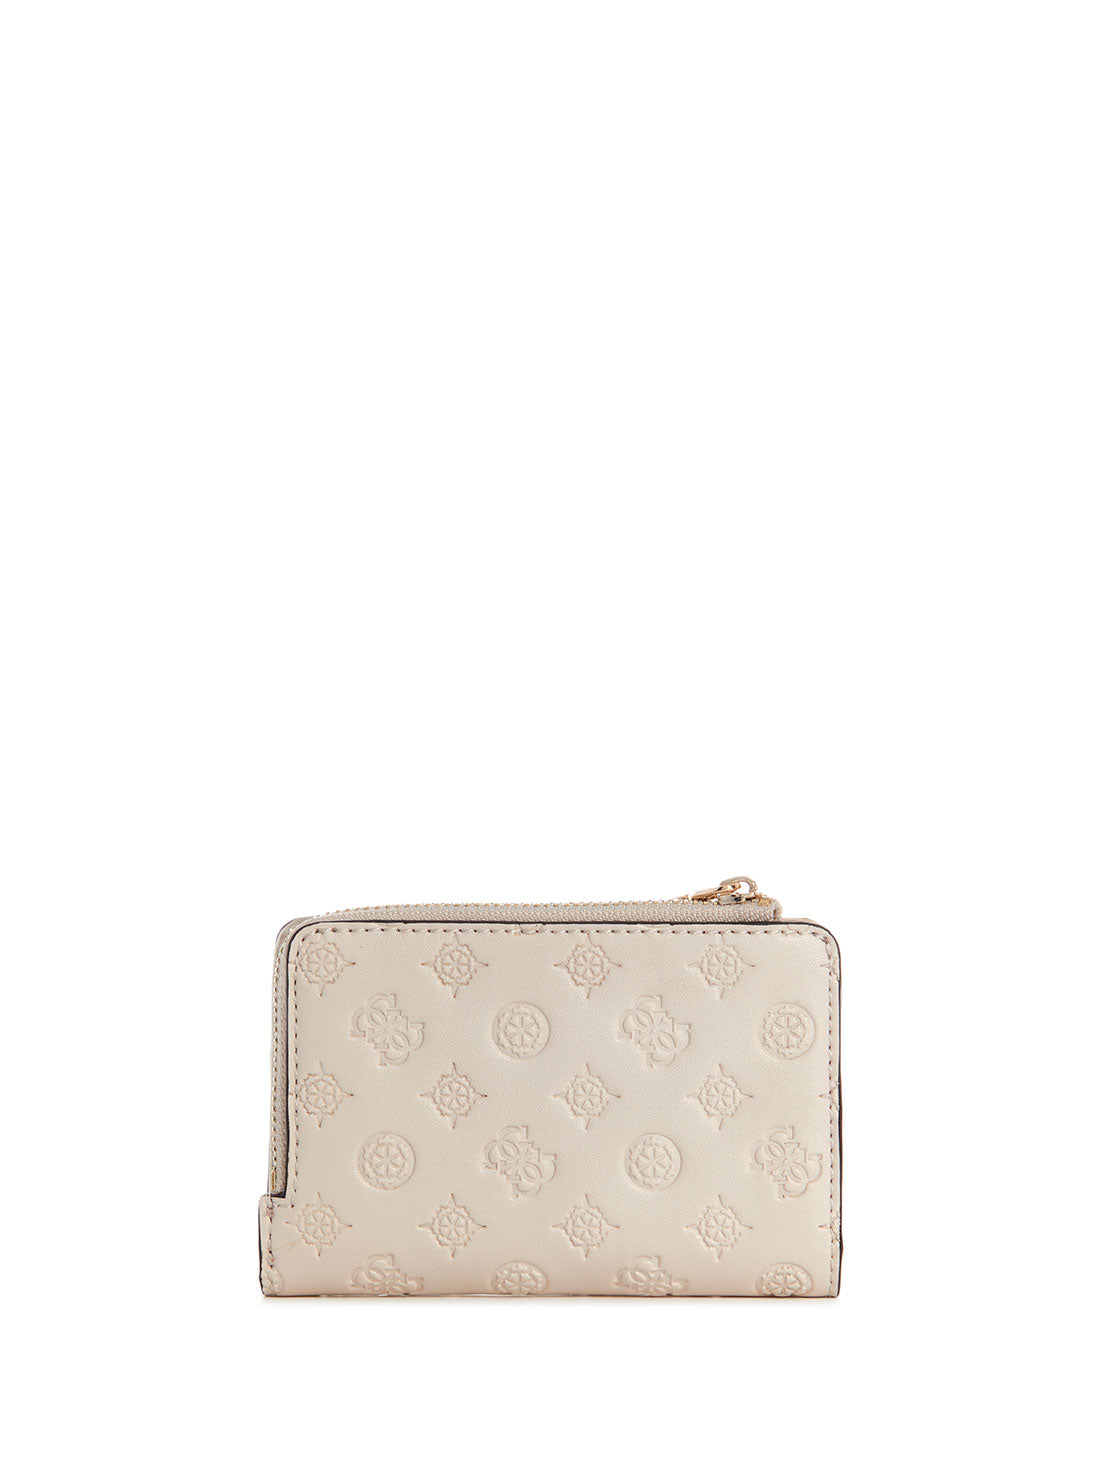 GUESS Taupe Logo Arlena Card Case back view